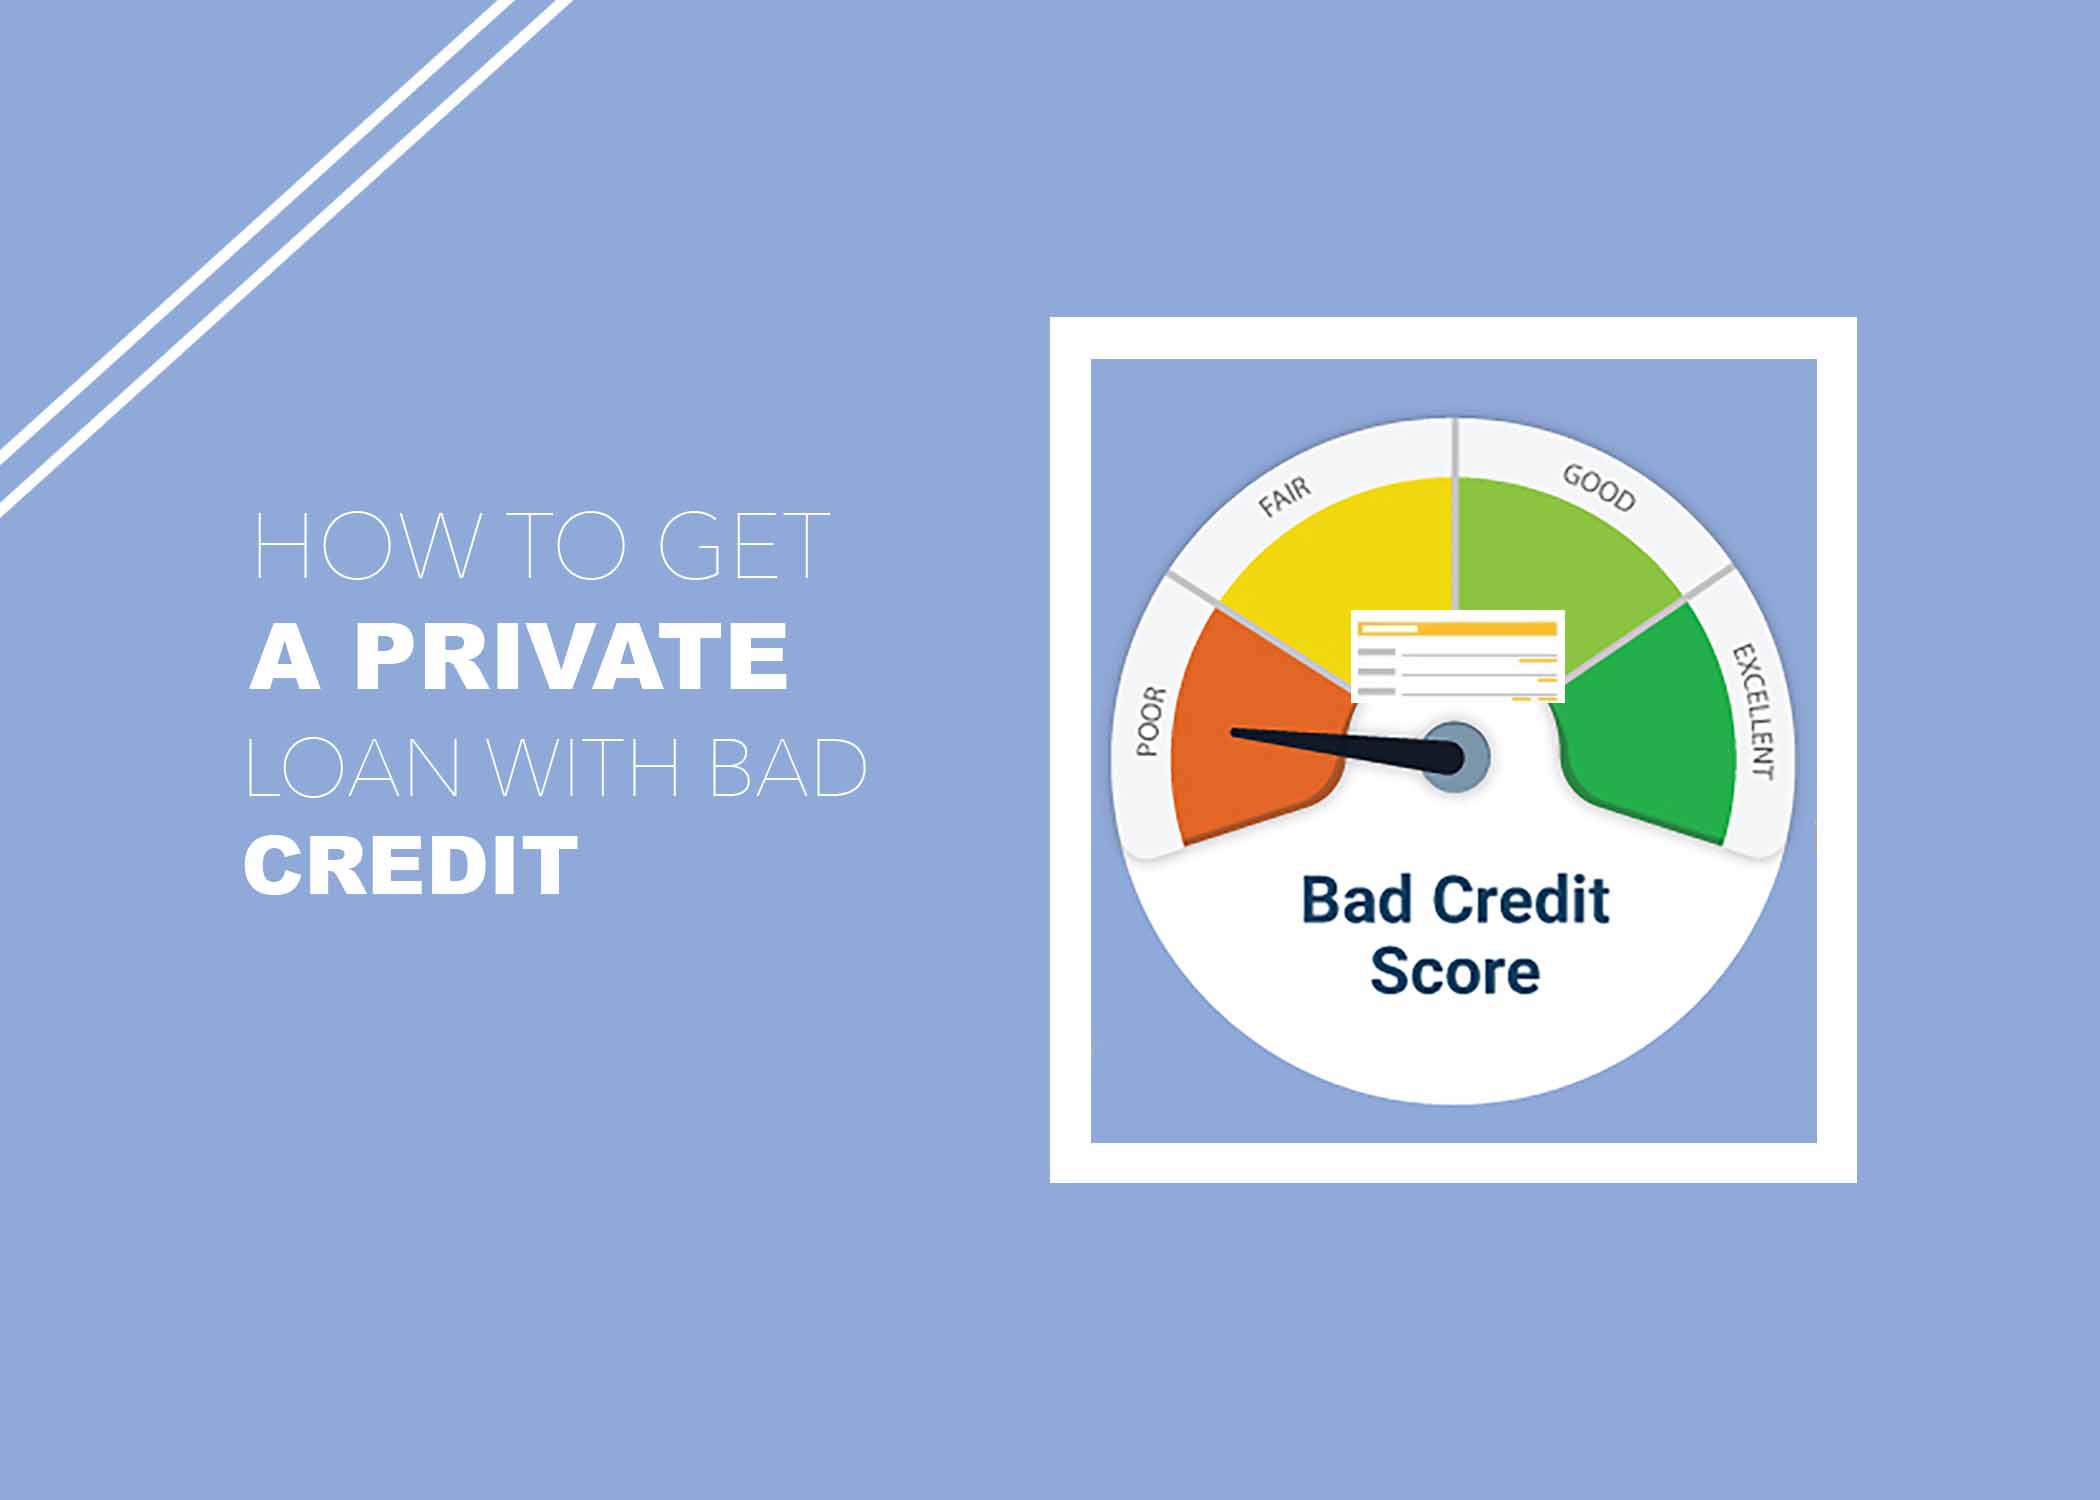 How to Get a Private Loan with Bad Credit